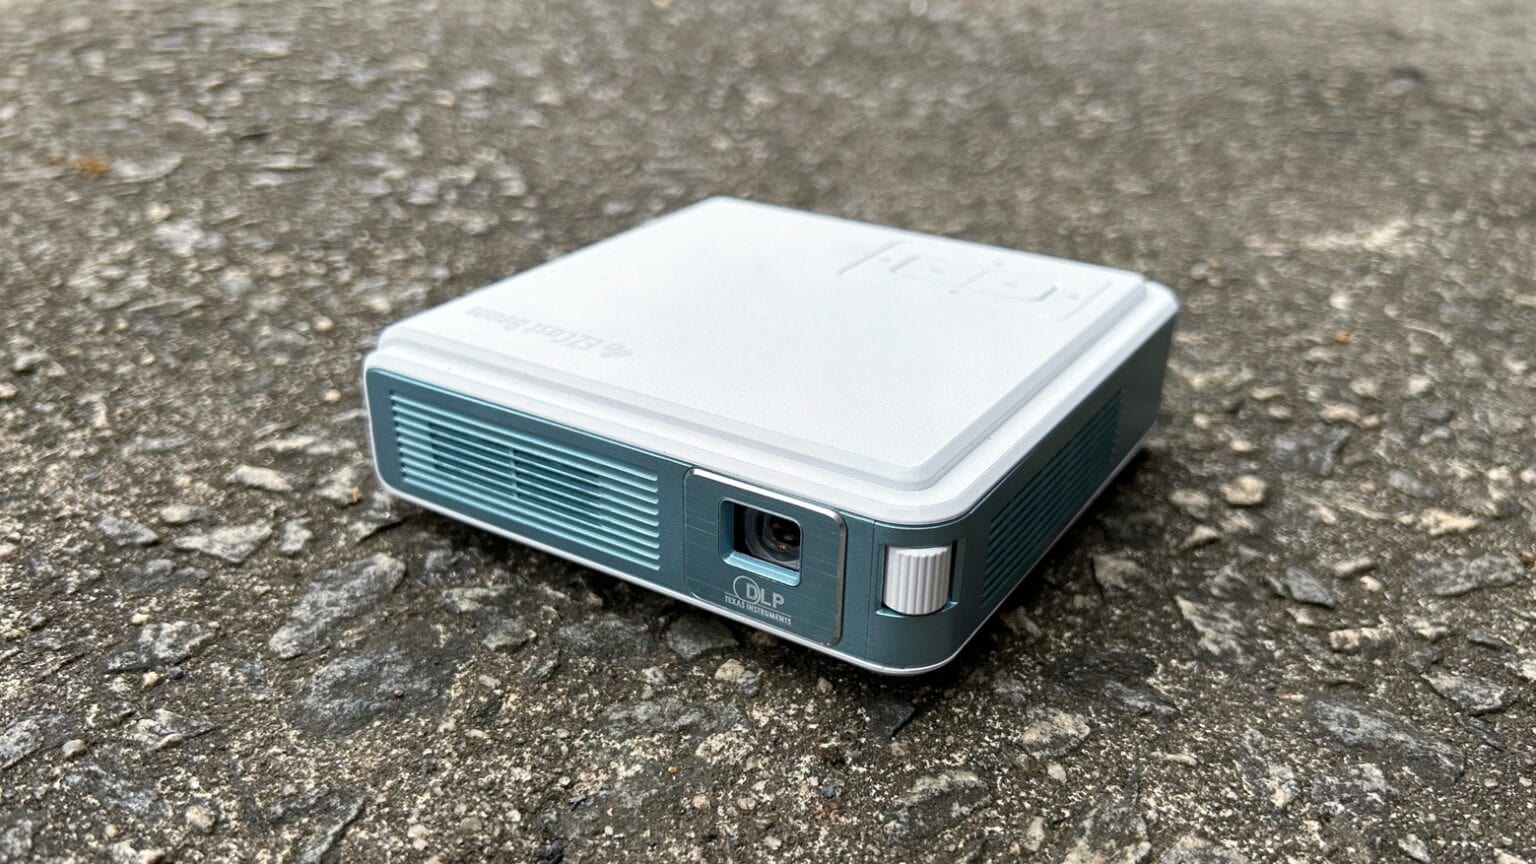 Add fun to your vacation with this amazingly small pico projector